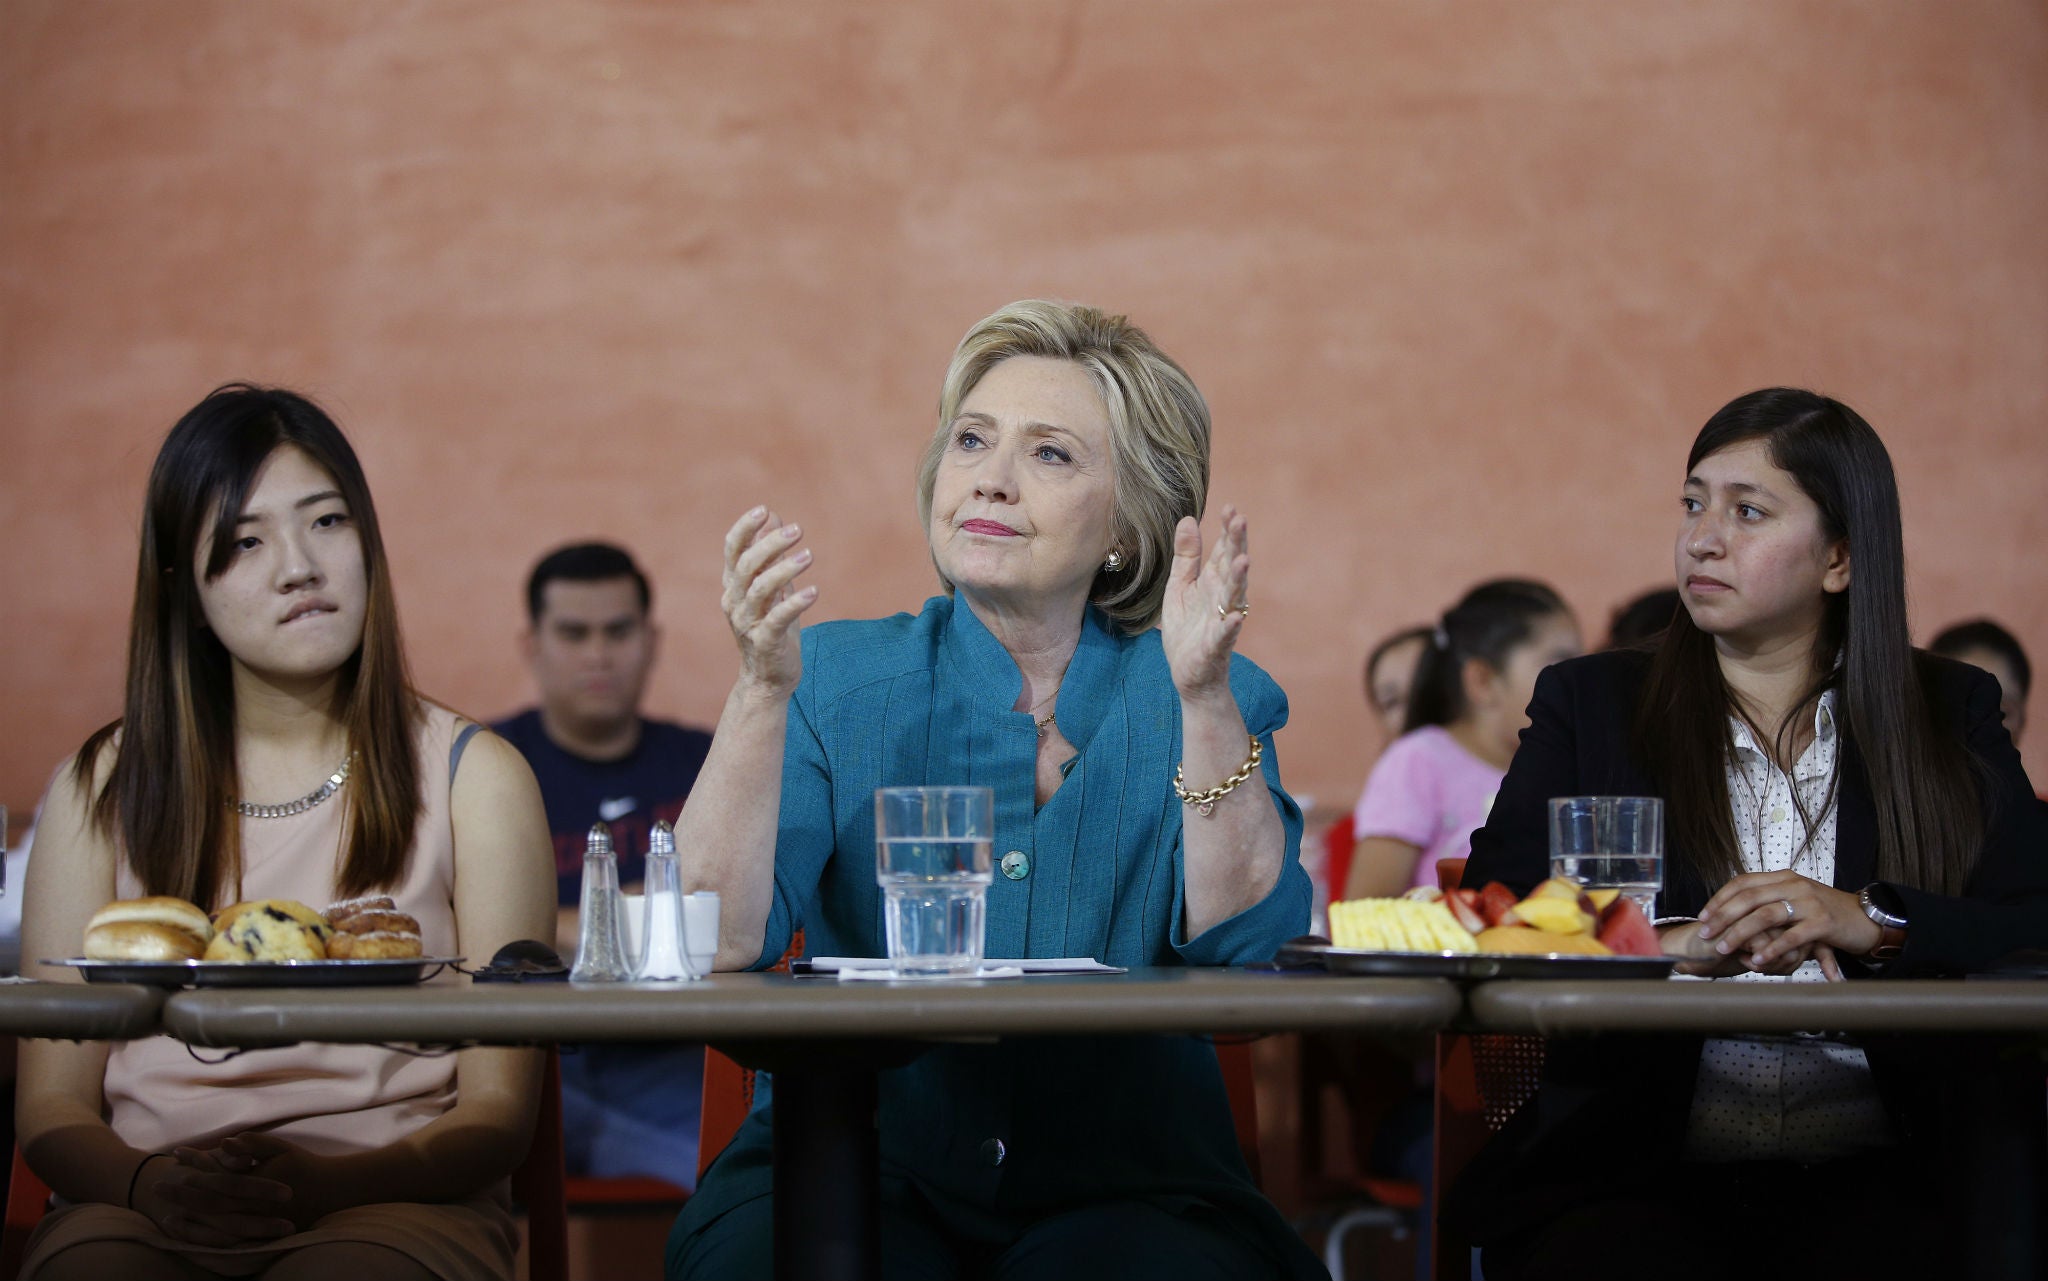 Hillary Clinton hosts a discussion on immigration with Latino and Asian voters at Mission College near Los Angeles